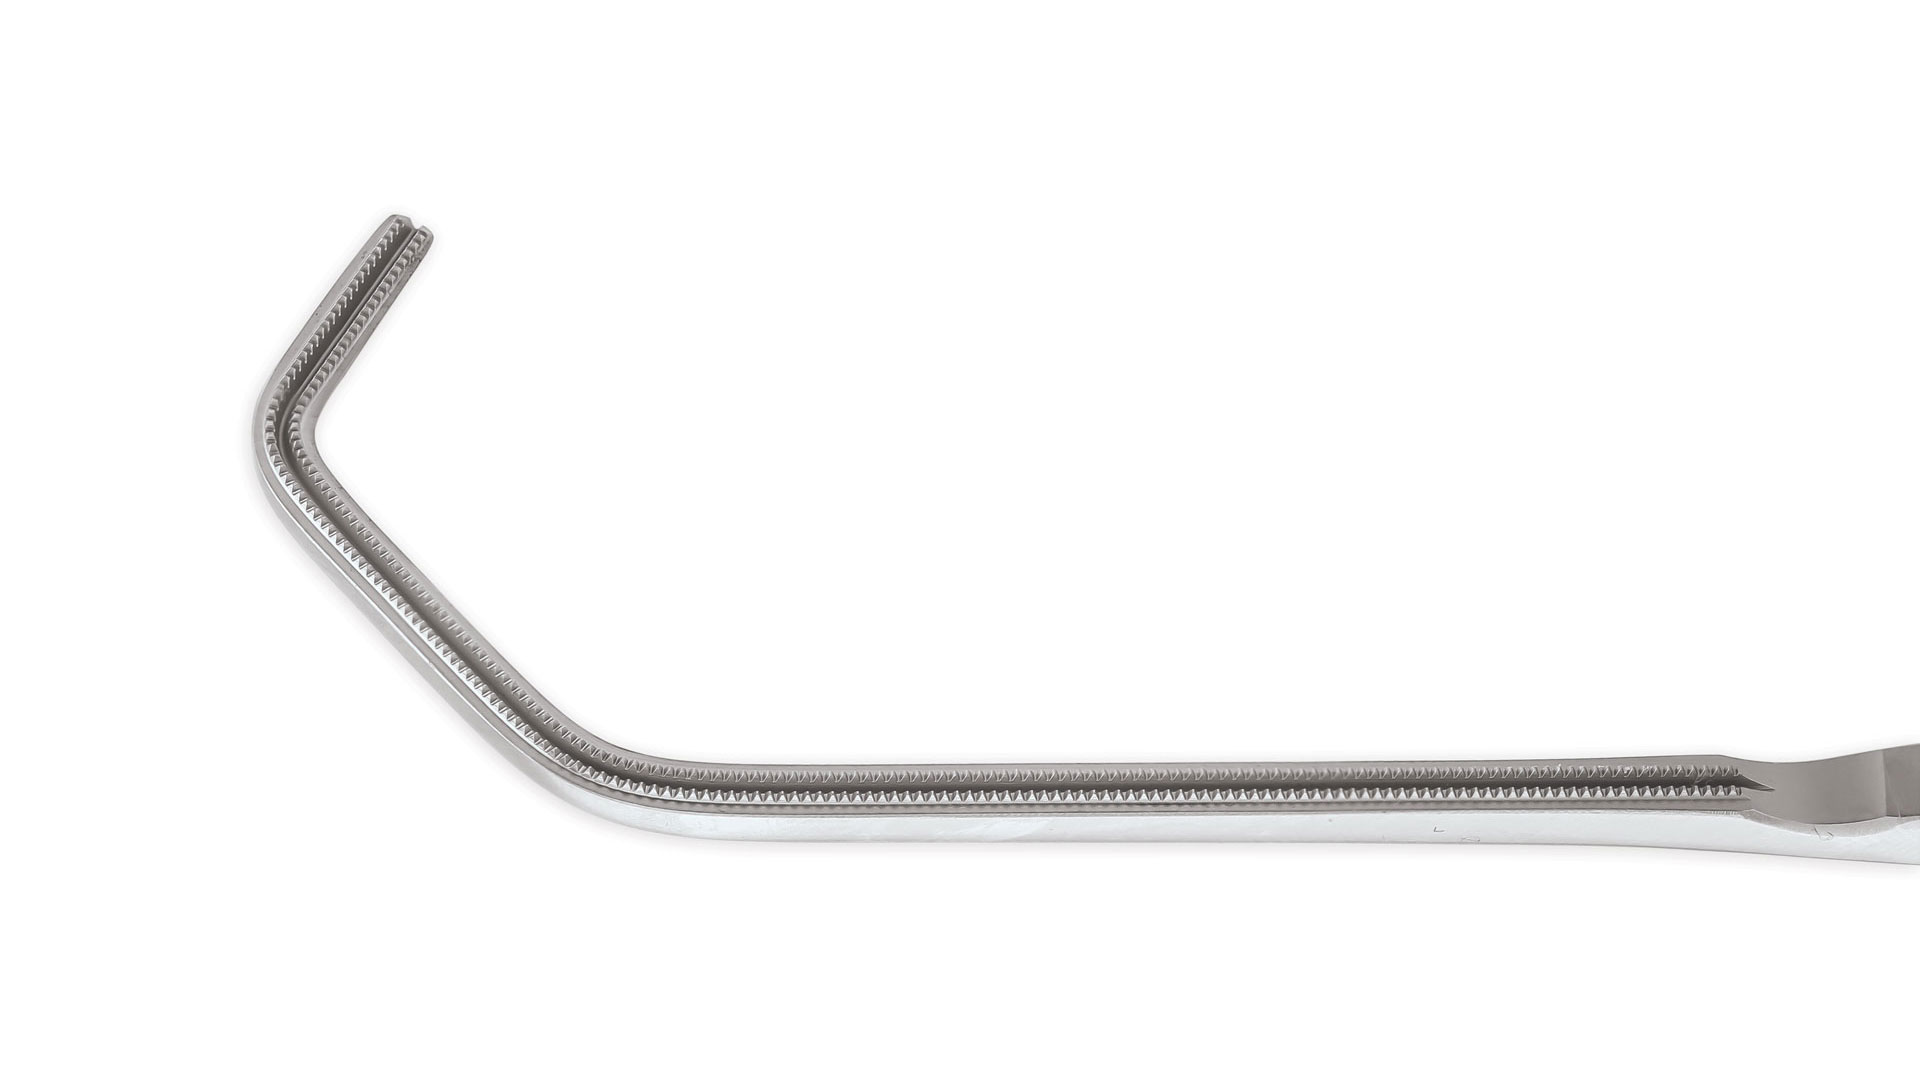 Tangential Occlusion Clamp - 34mm DeBakey Atraumatic jaws